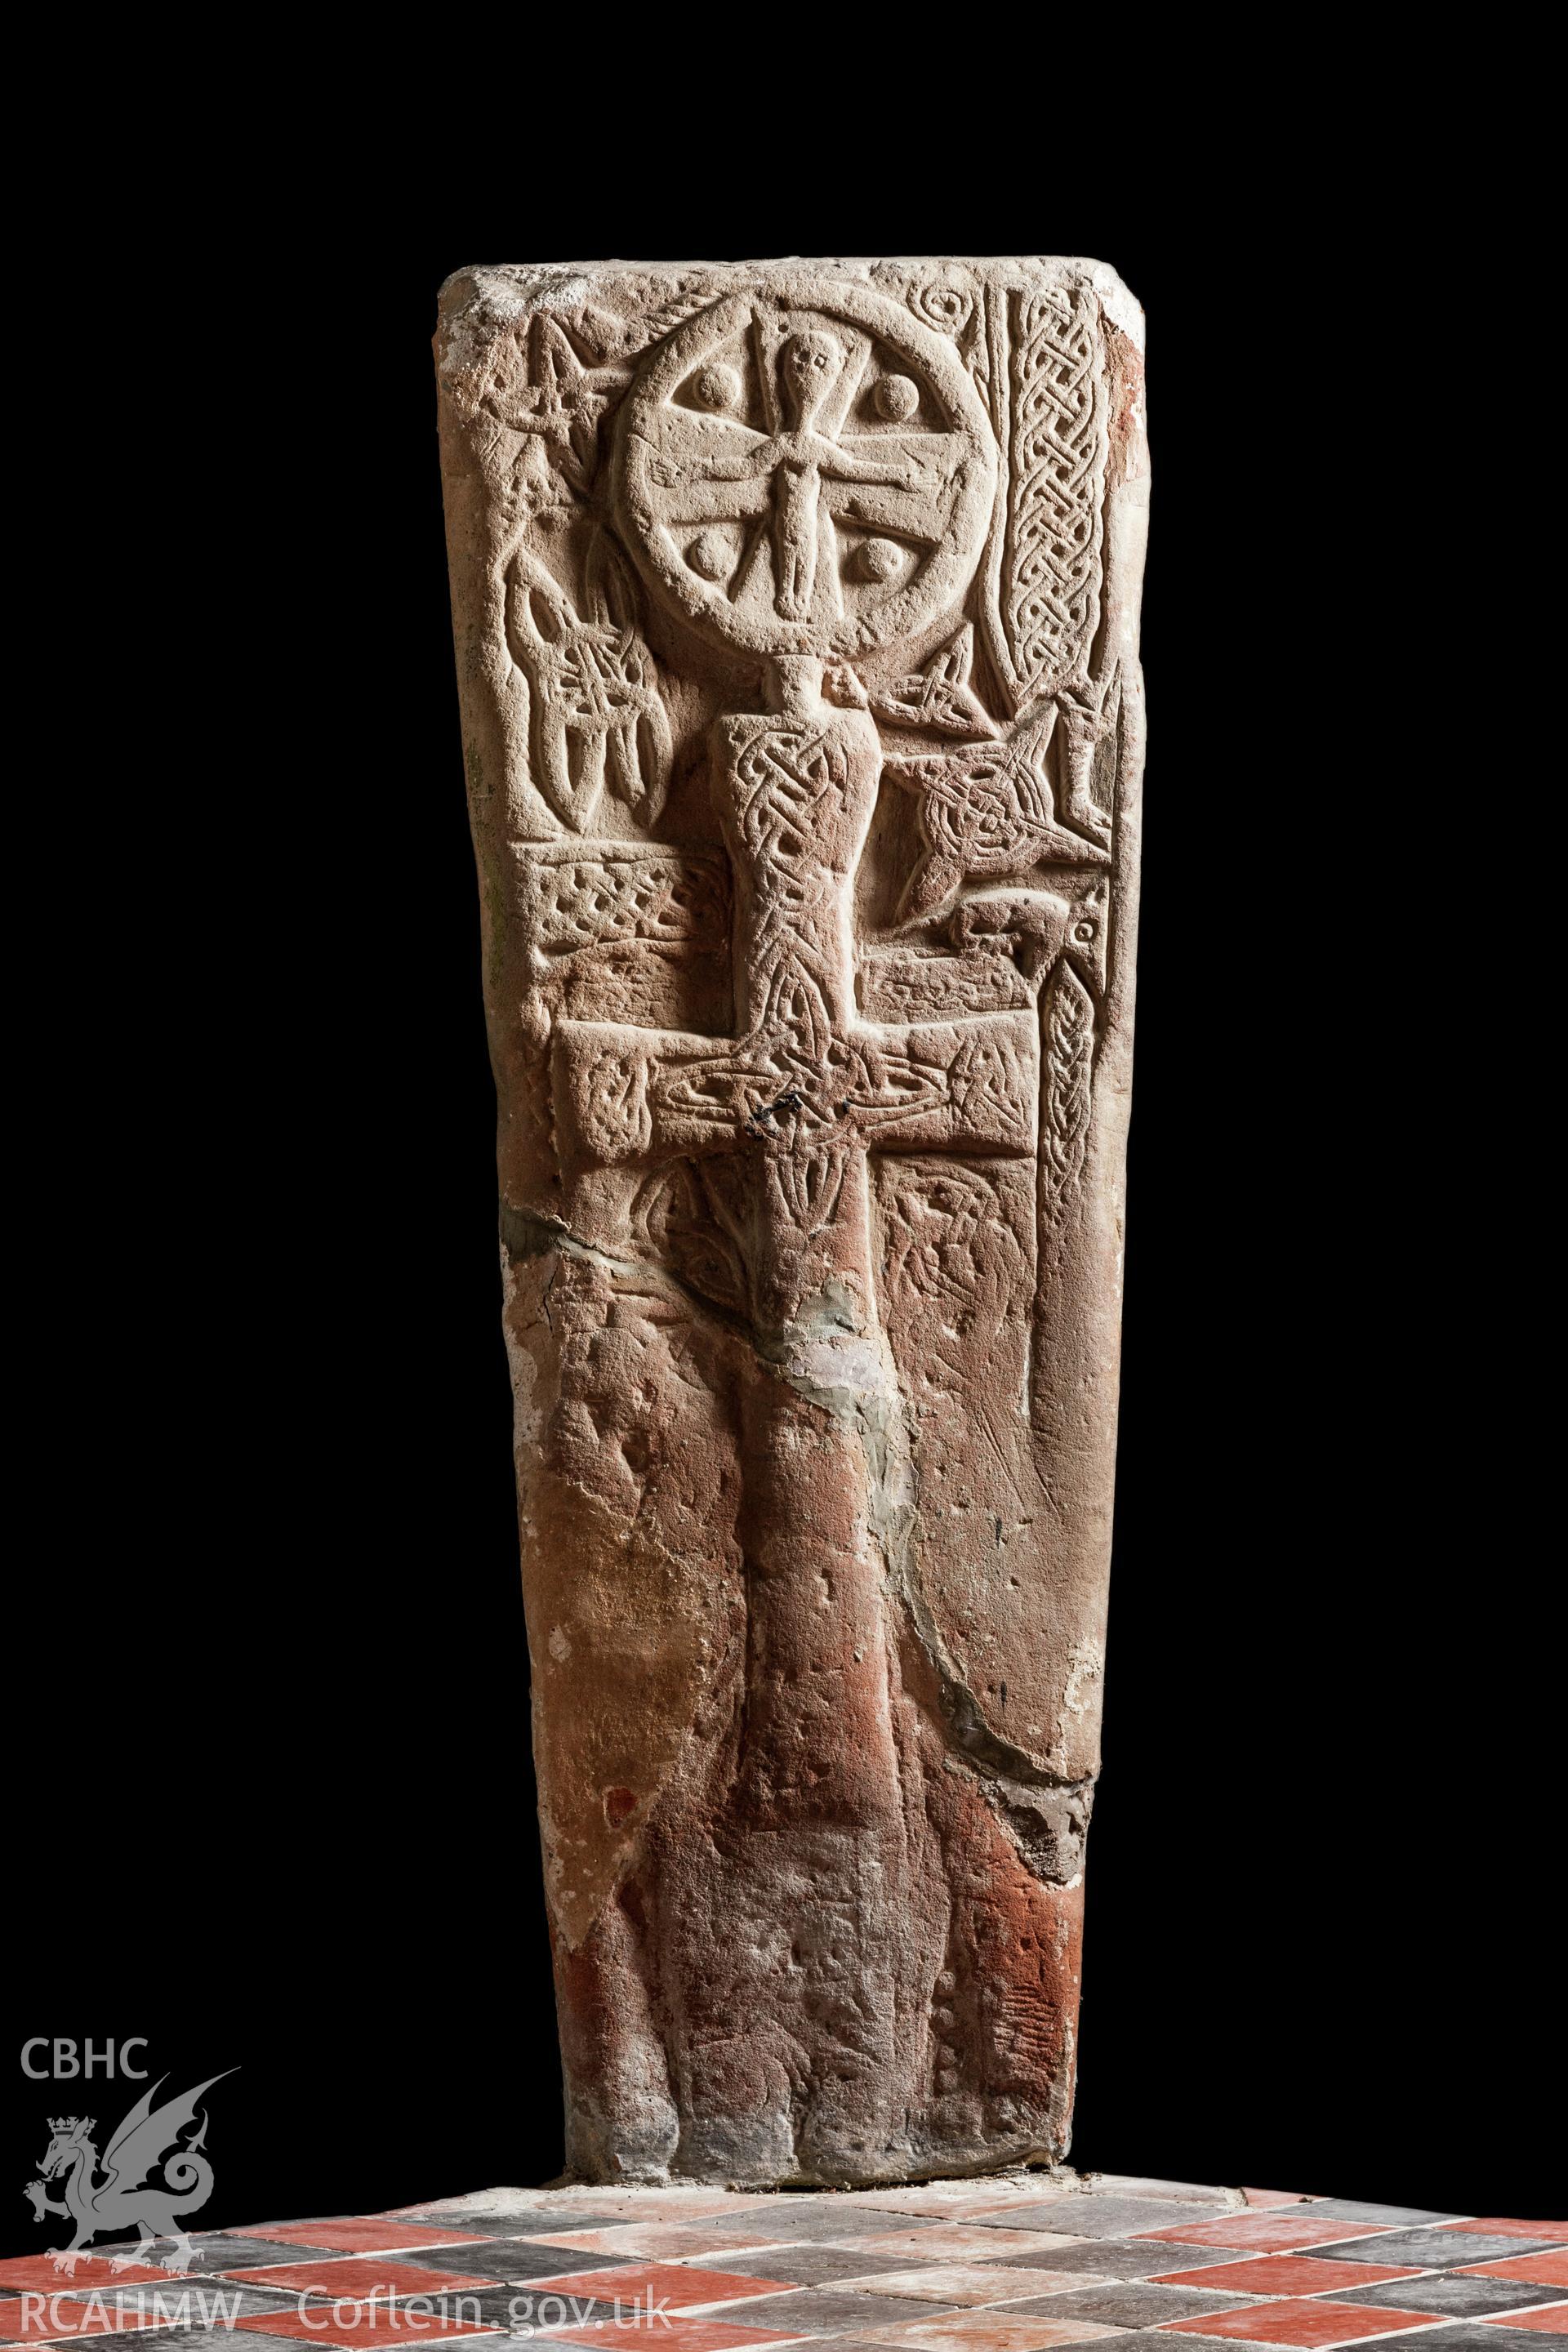 Early Christian carved stone.